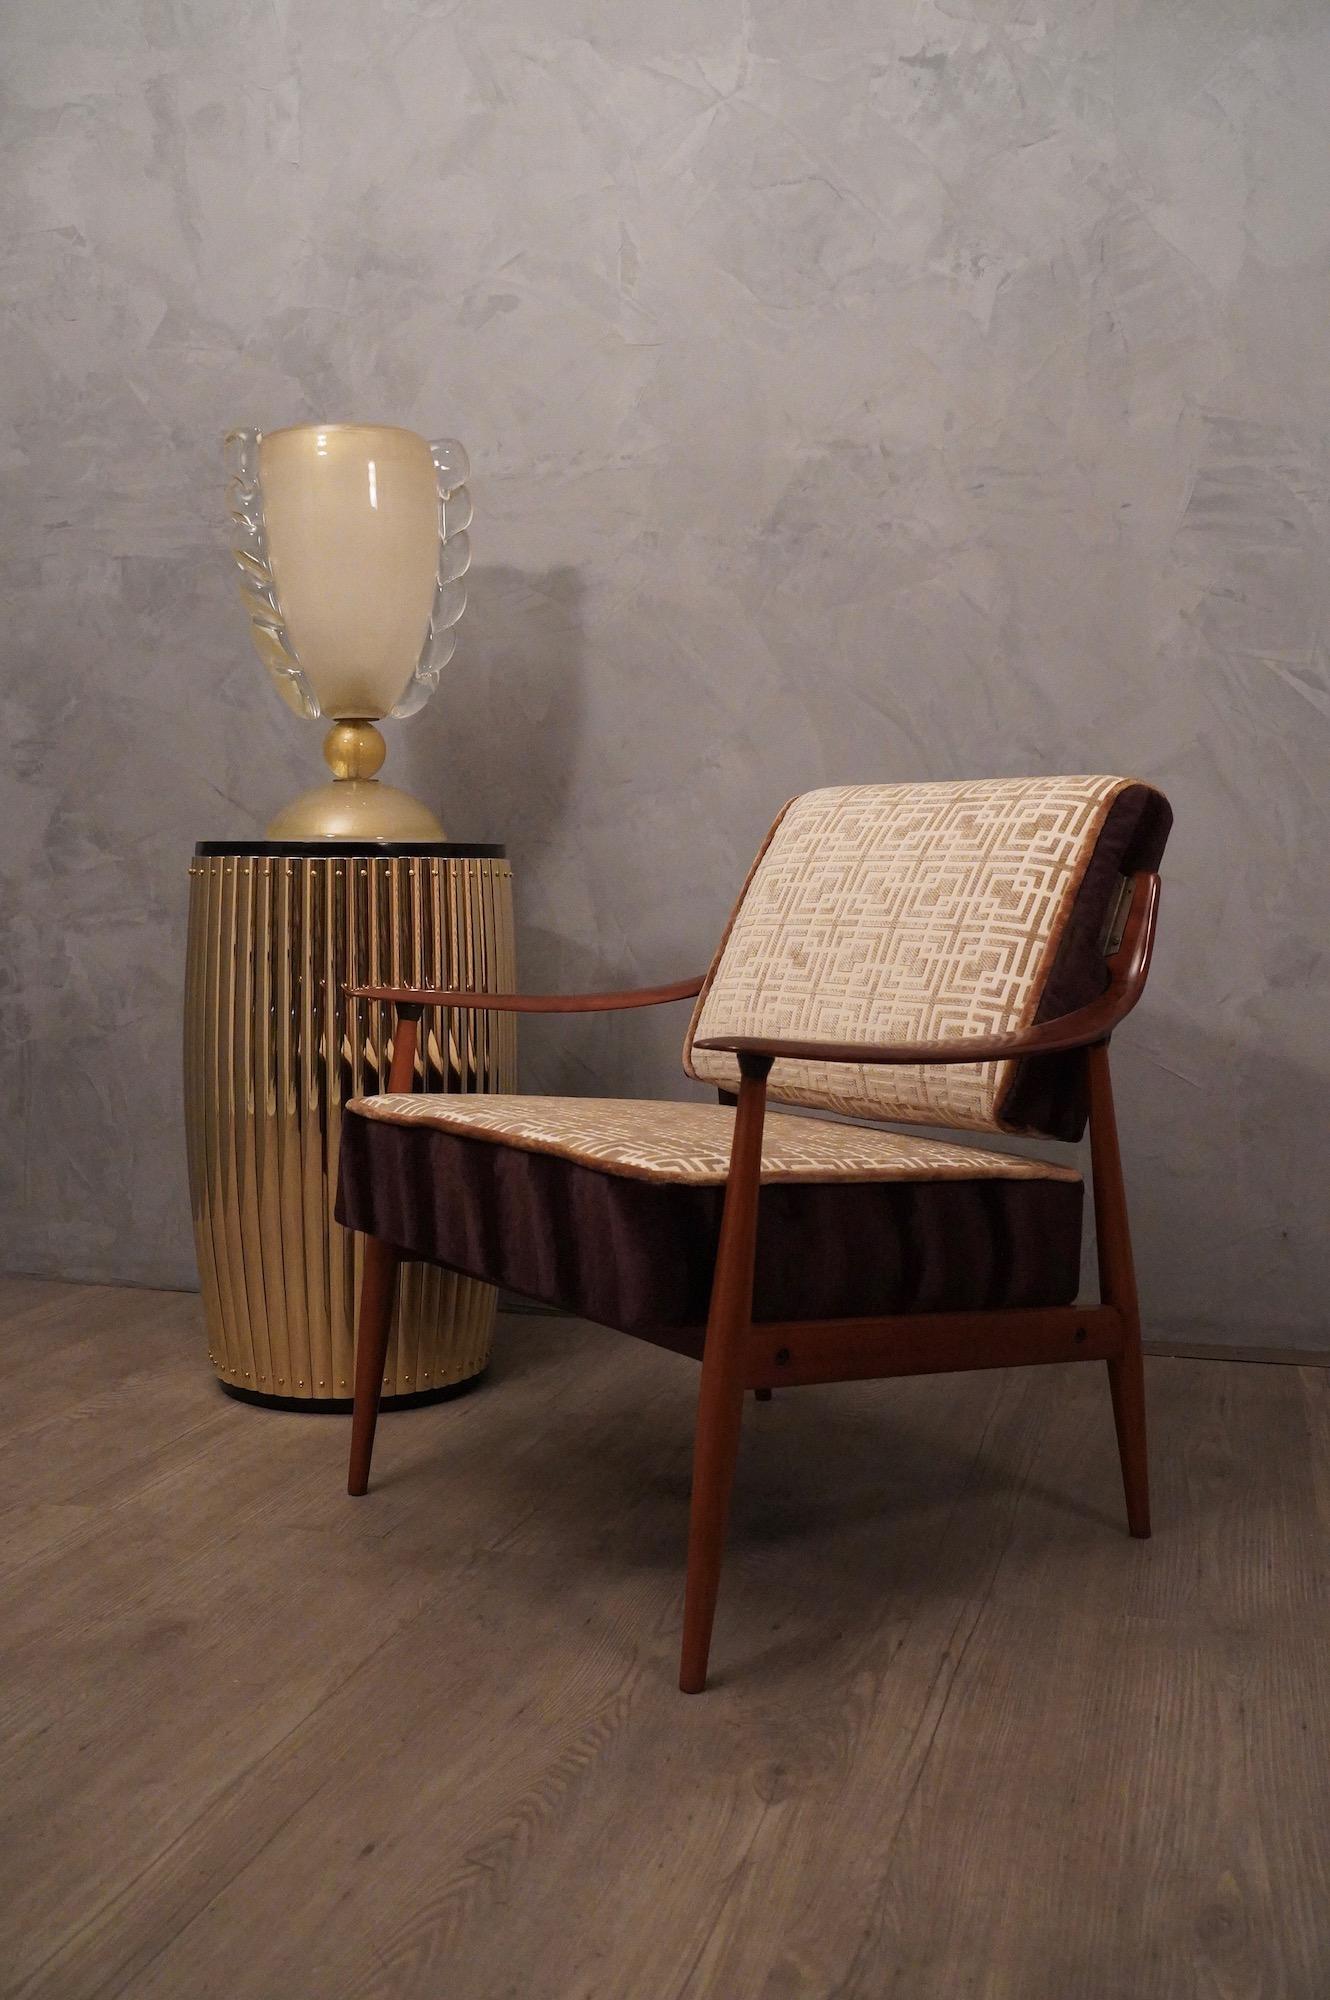 Armchair in the classic Italian style, in wood and elegant velvet upholstery with geometric designs. Note the shape of the side uprights of the backrest and the outline of the armrests.

Armchair composed of a structure in polished beechwood with